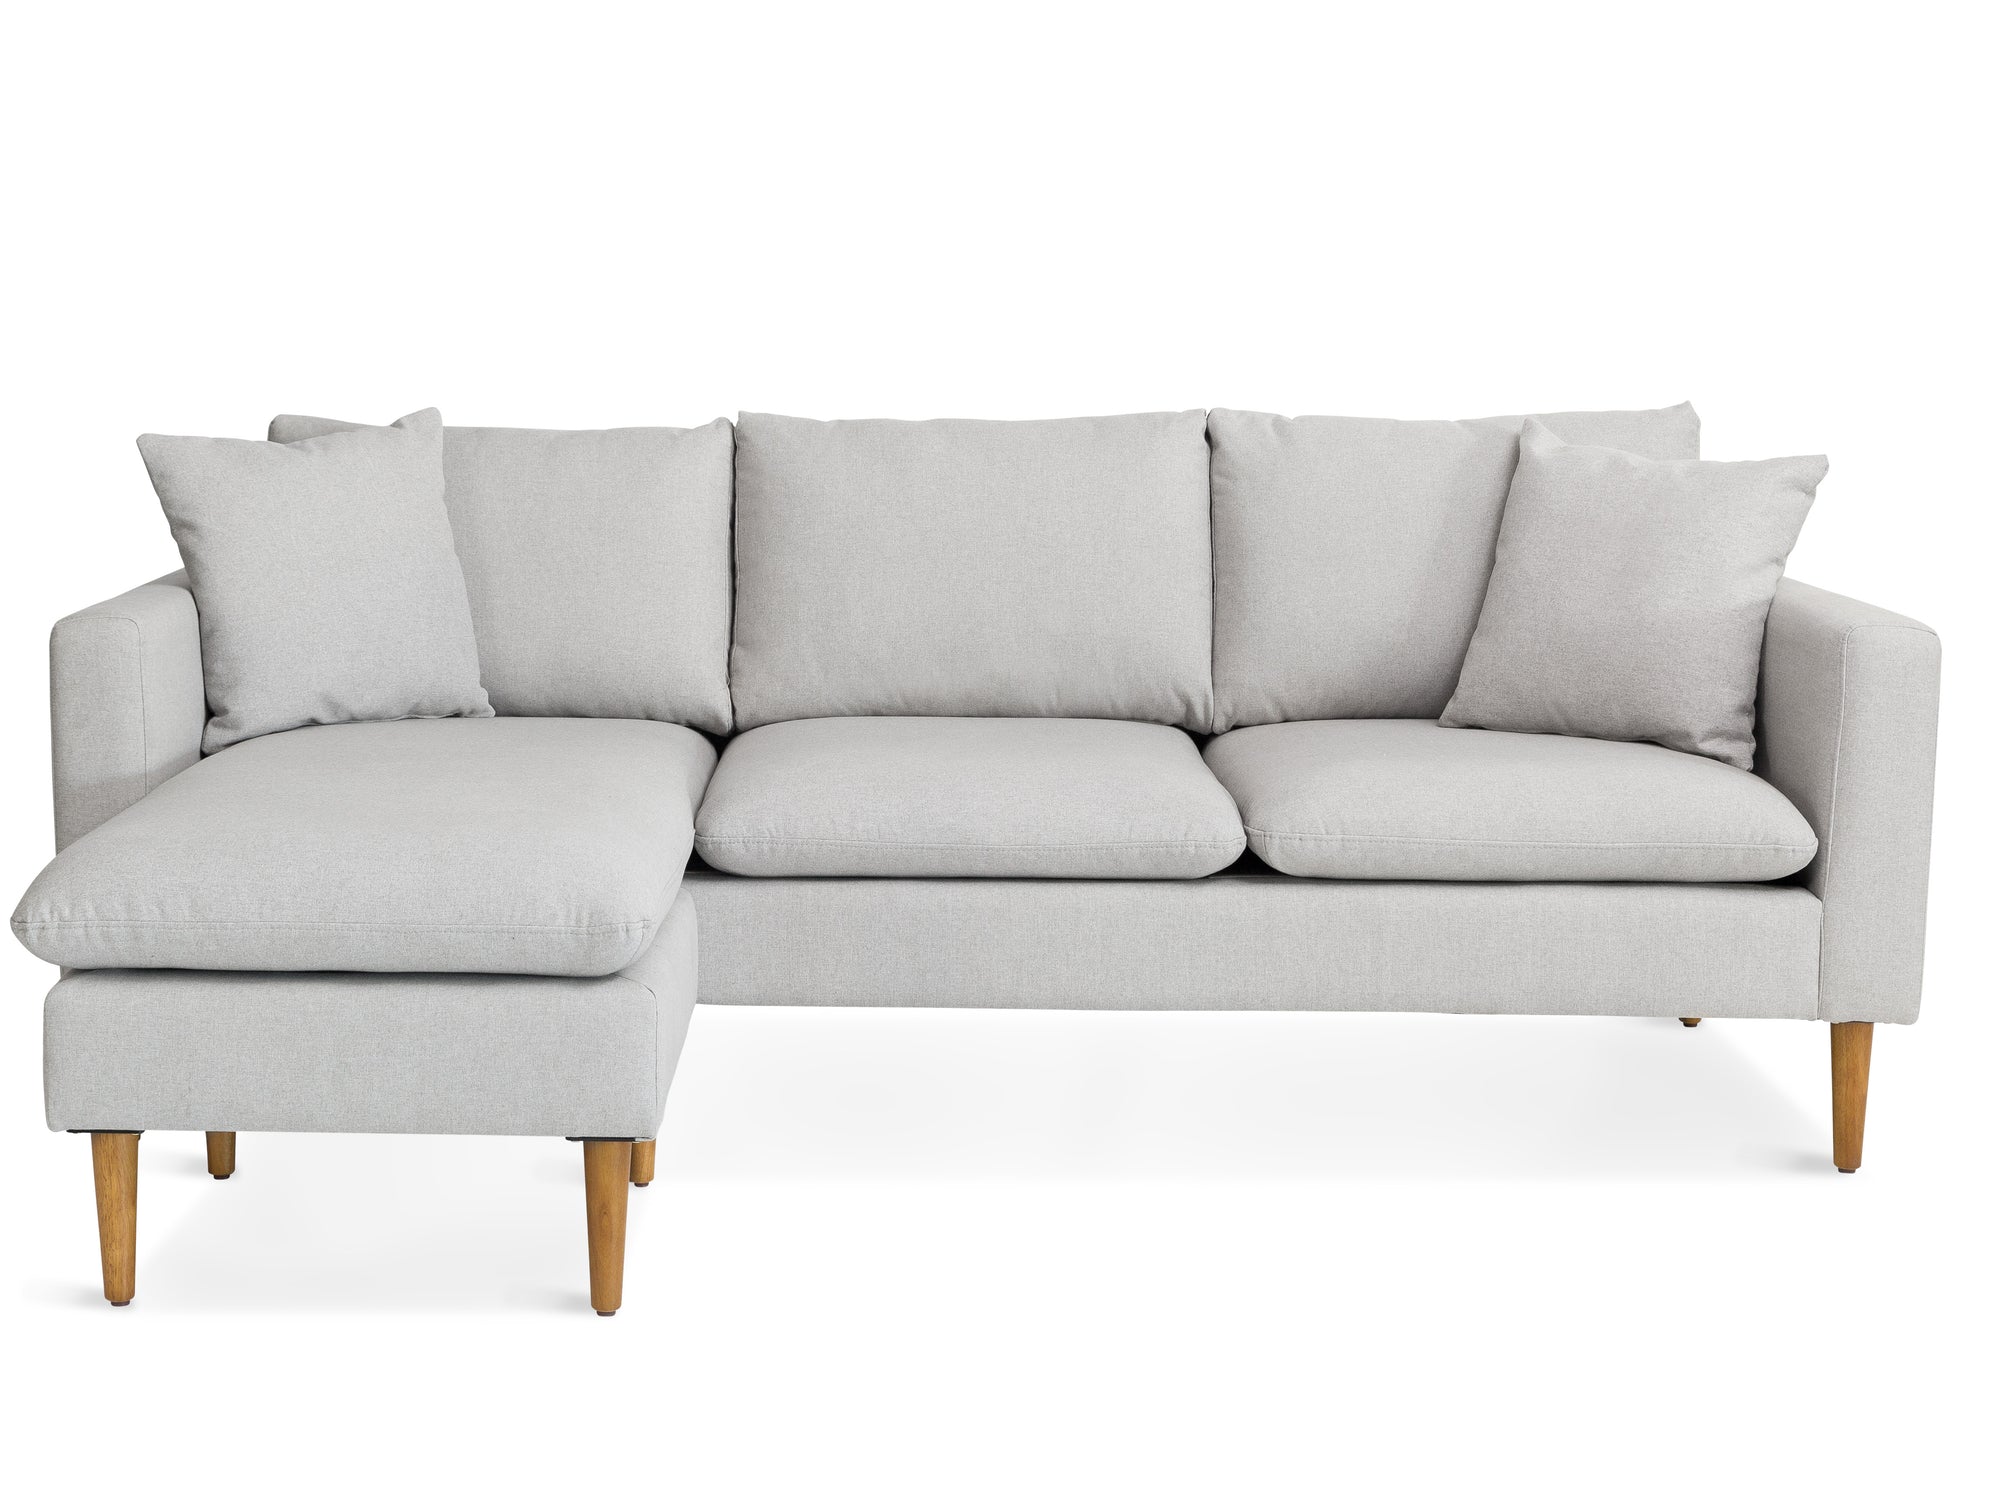 Reversible Flannel Sectional - The Everset